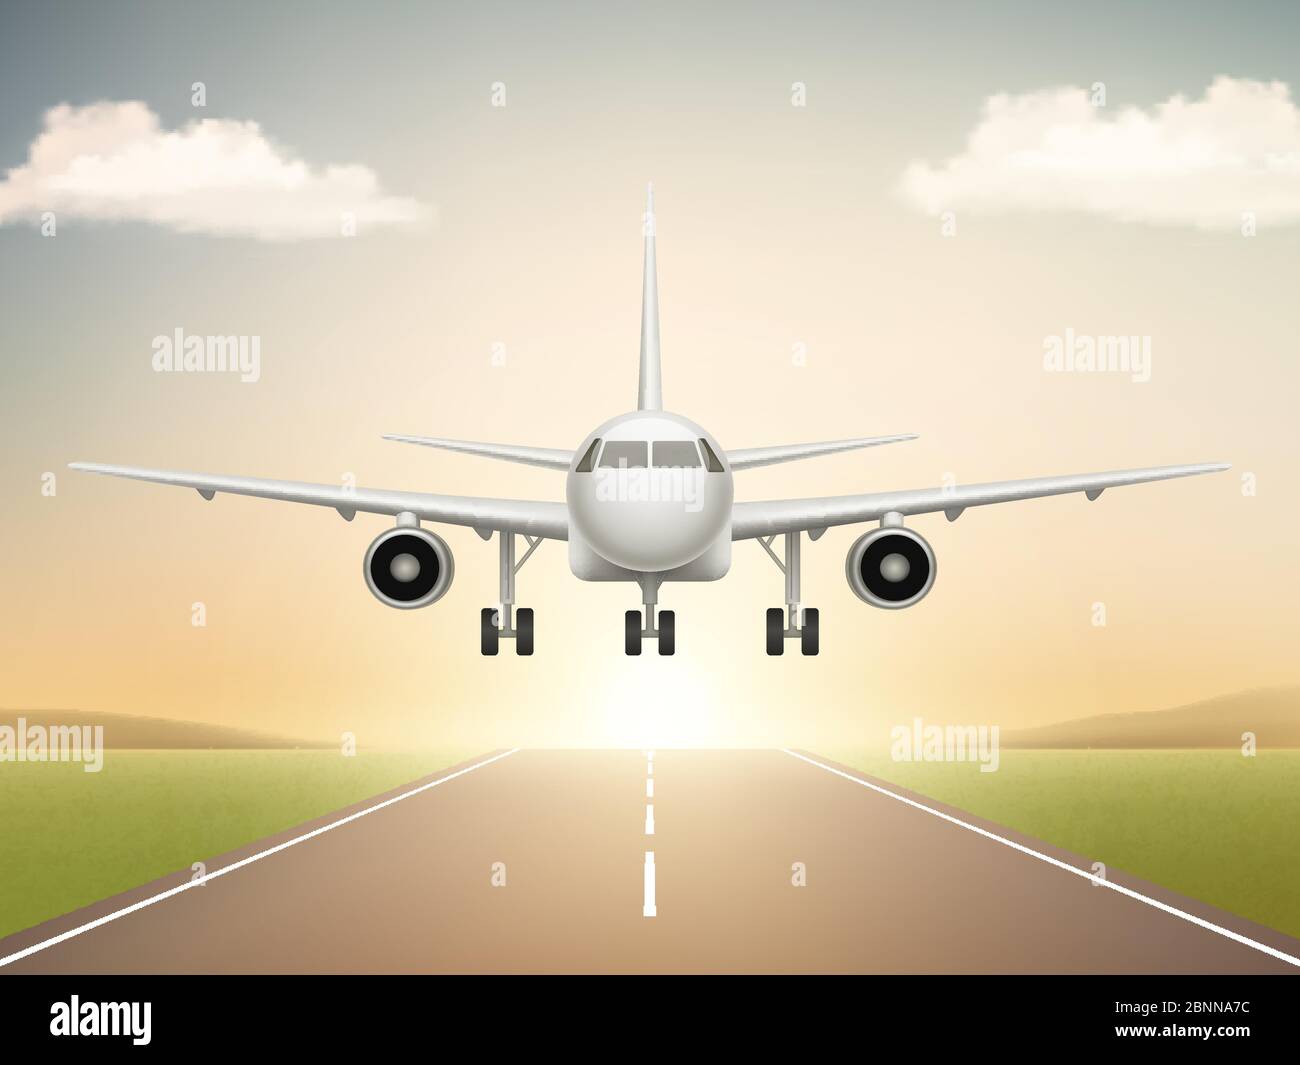 Jet aeroplane on runway. Aircraft takeoff from civil airline to blue sky realistic vector background illustrations Stock Vector